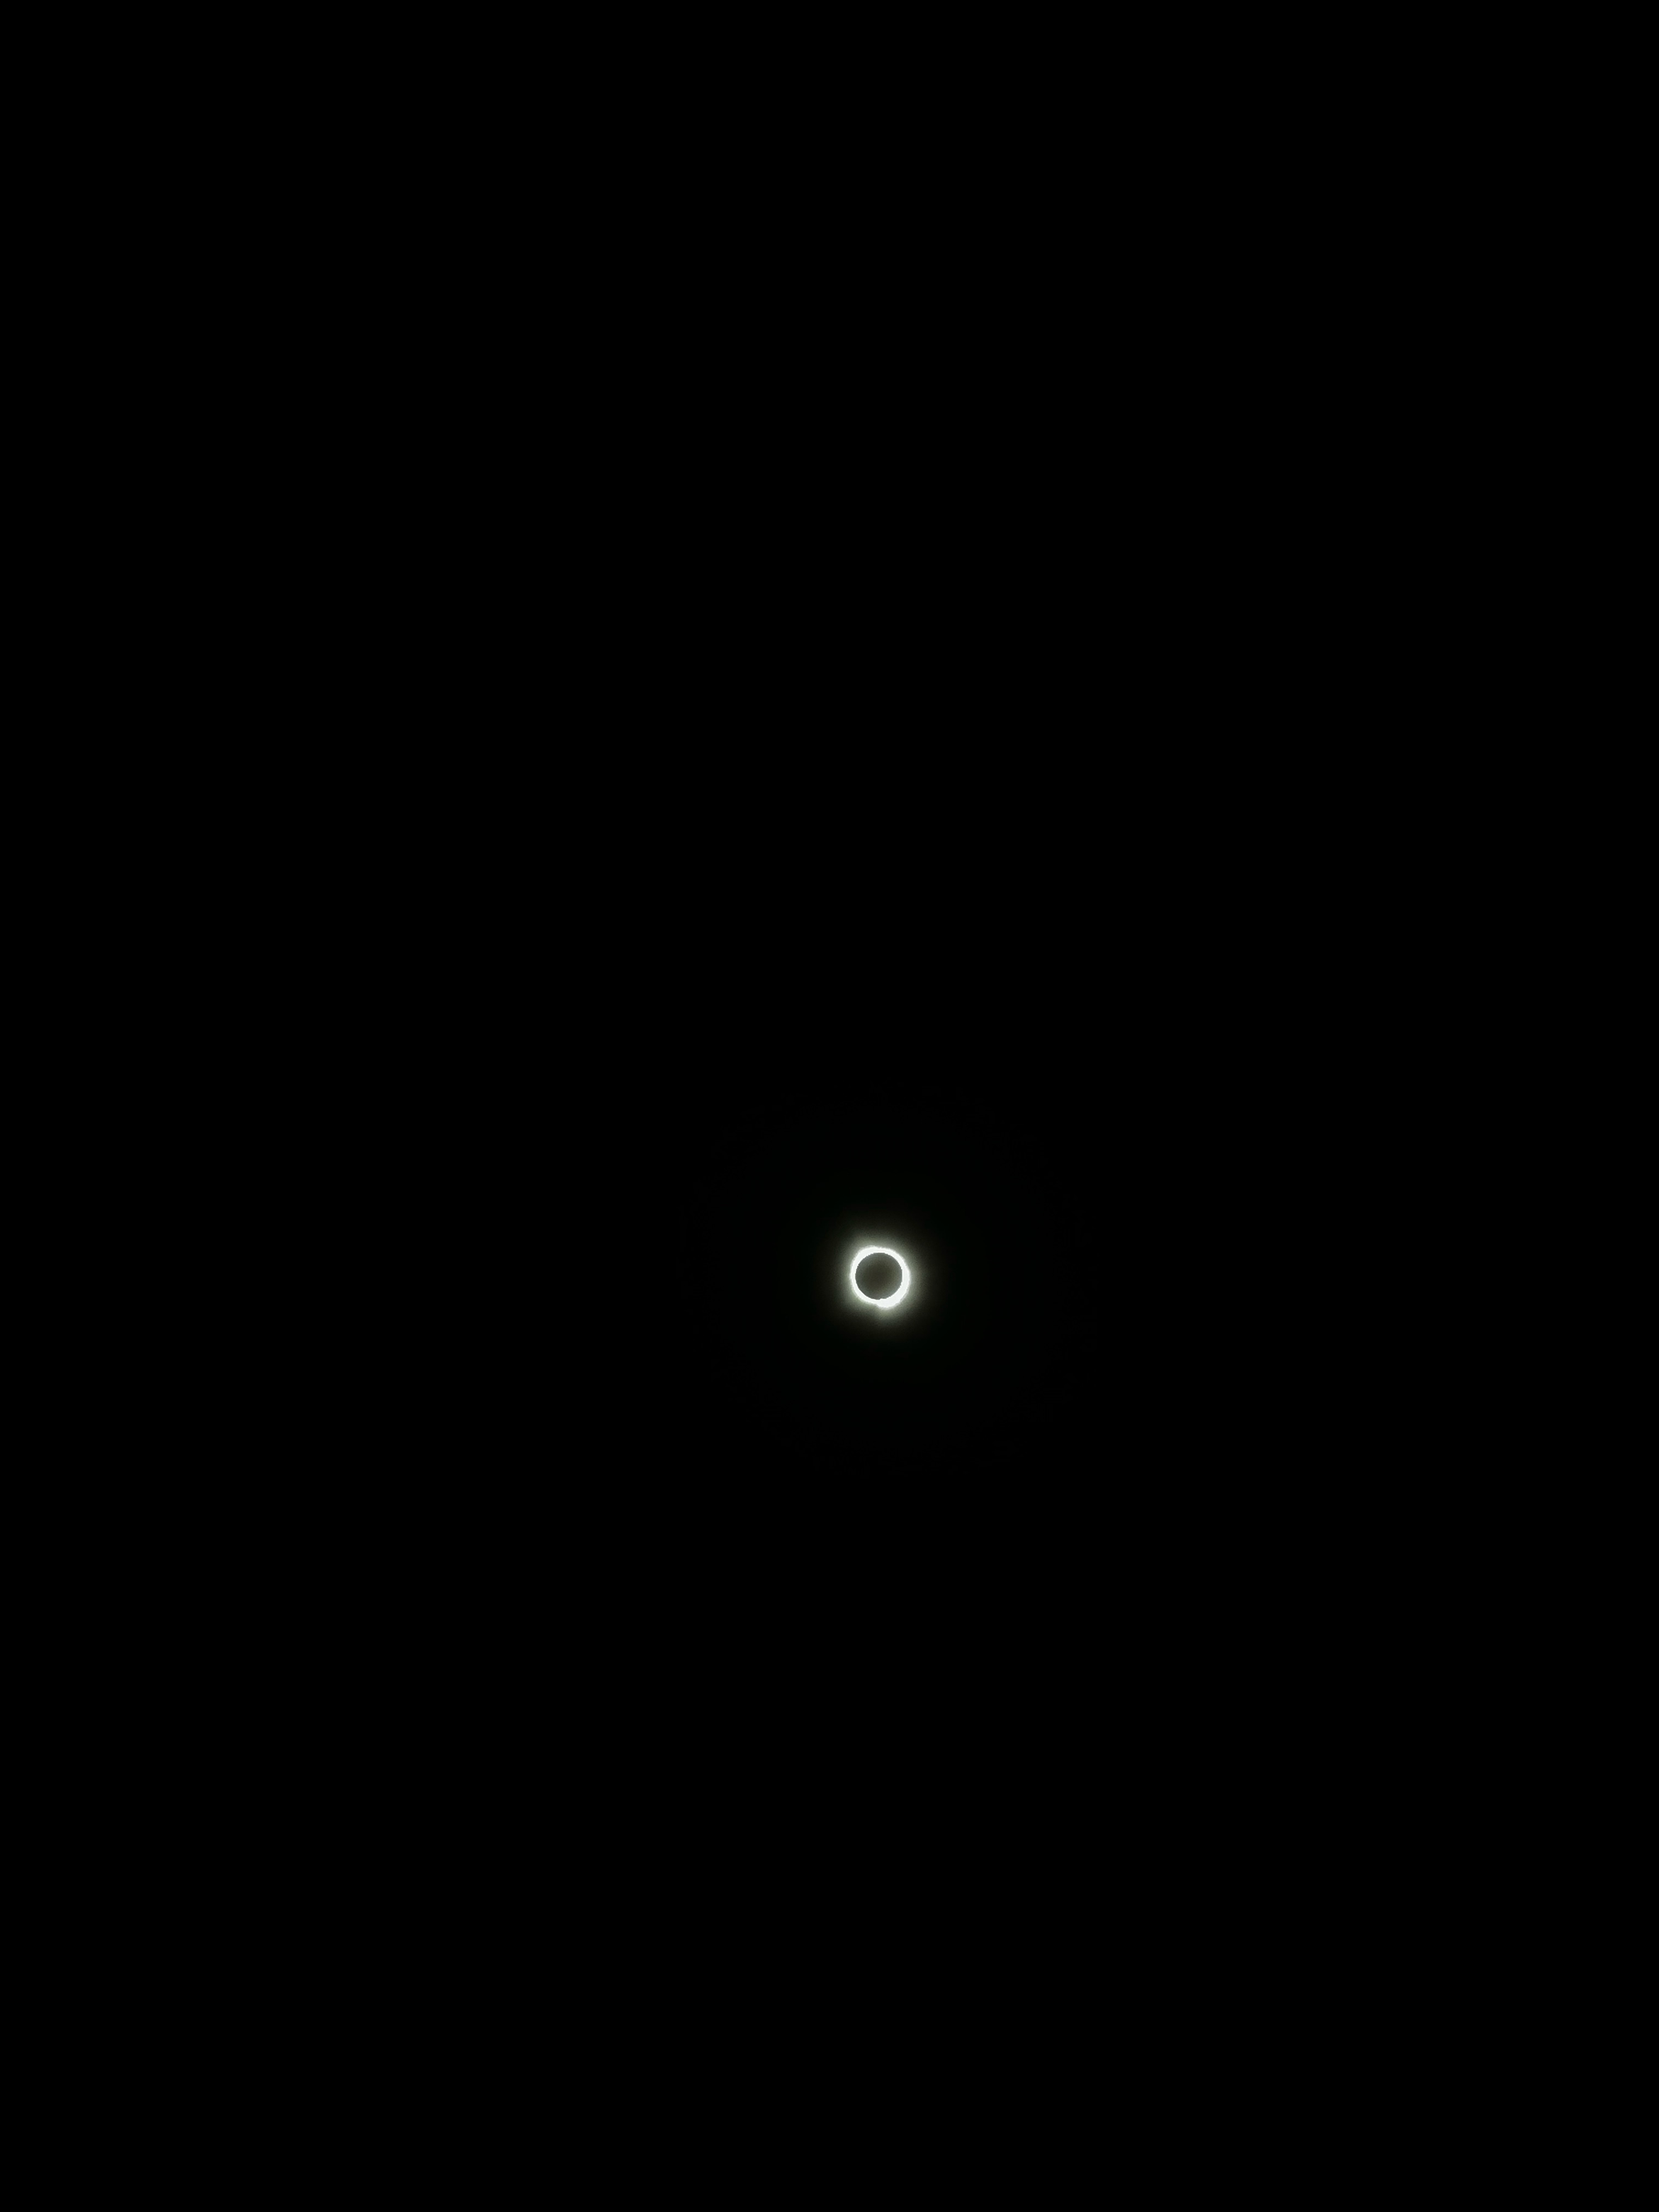 The solar eclipse seen as a distant ring against an all black background